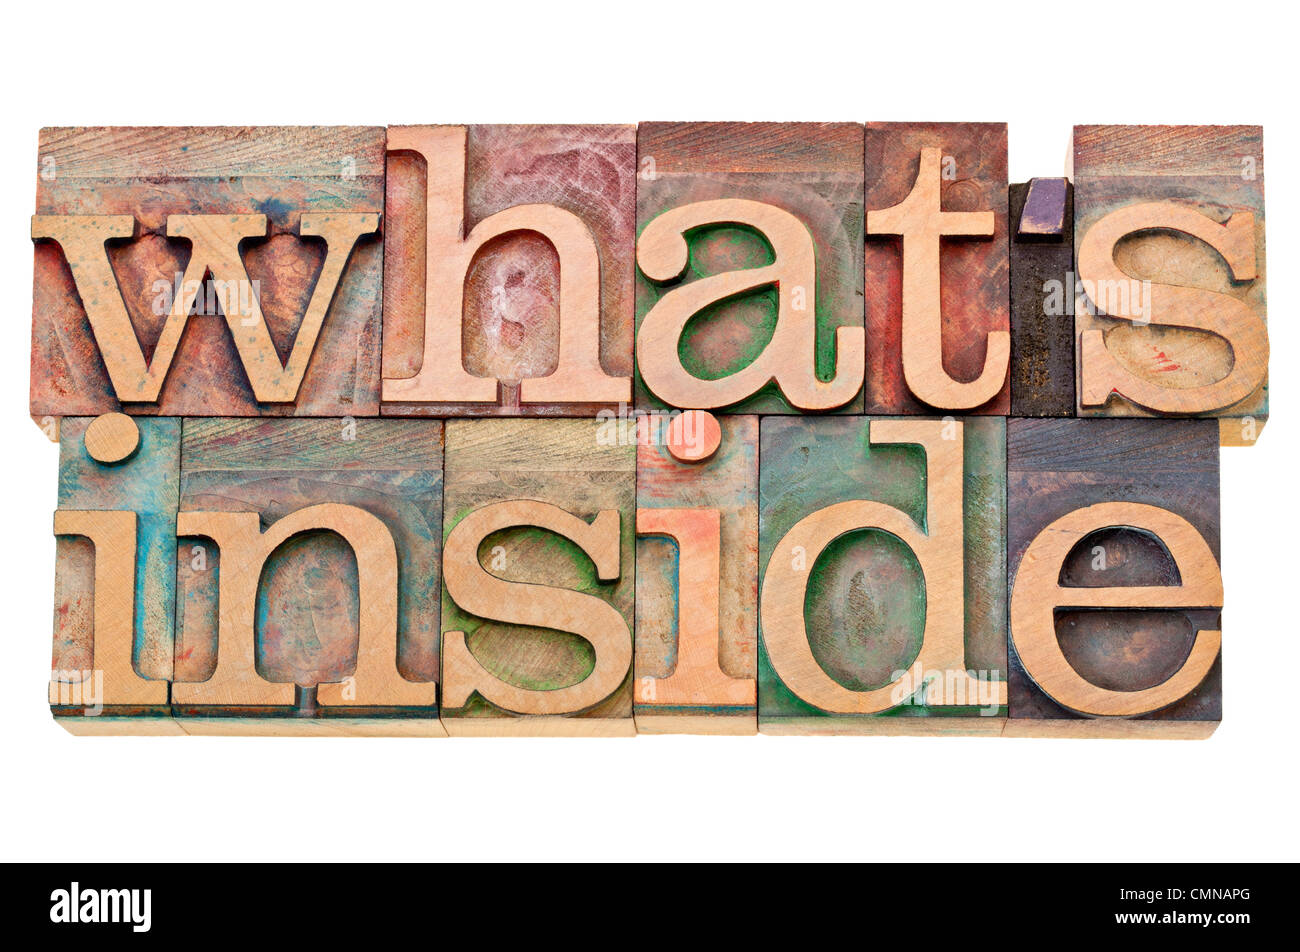 what is inside - content concept - isolated text in vintage letterpress wood type Stock Photo